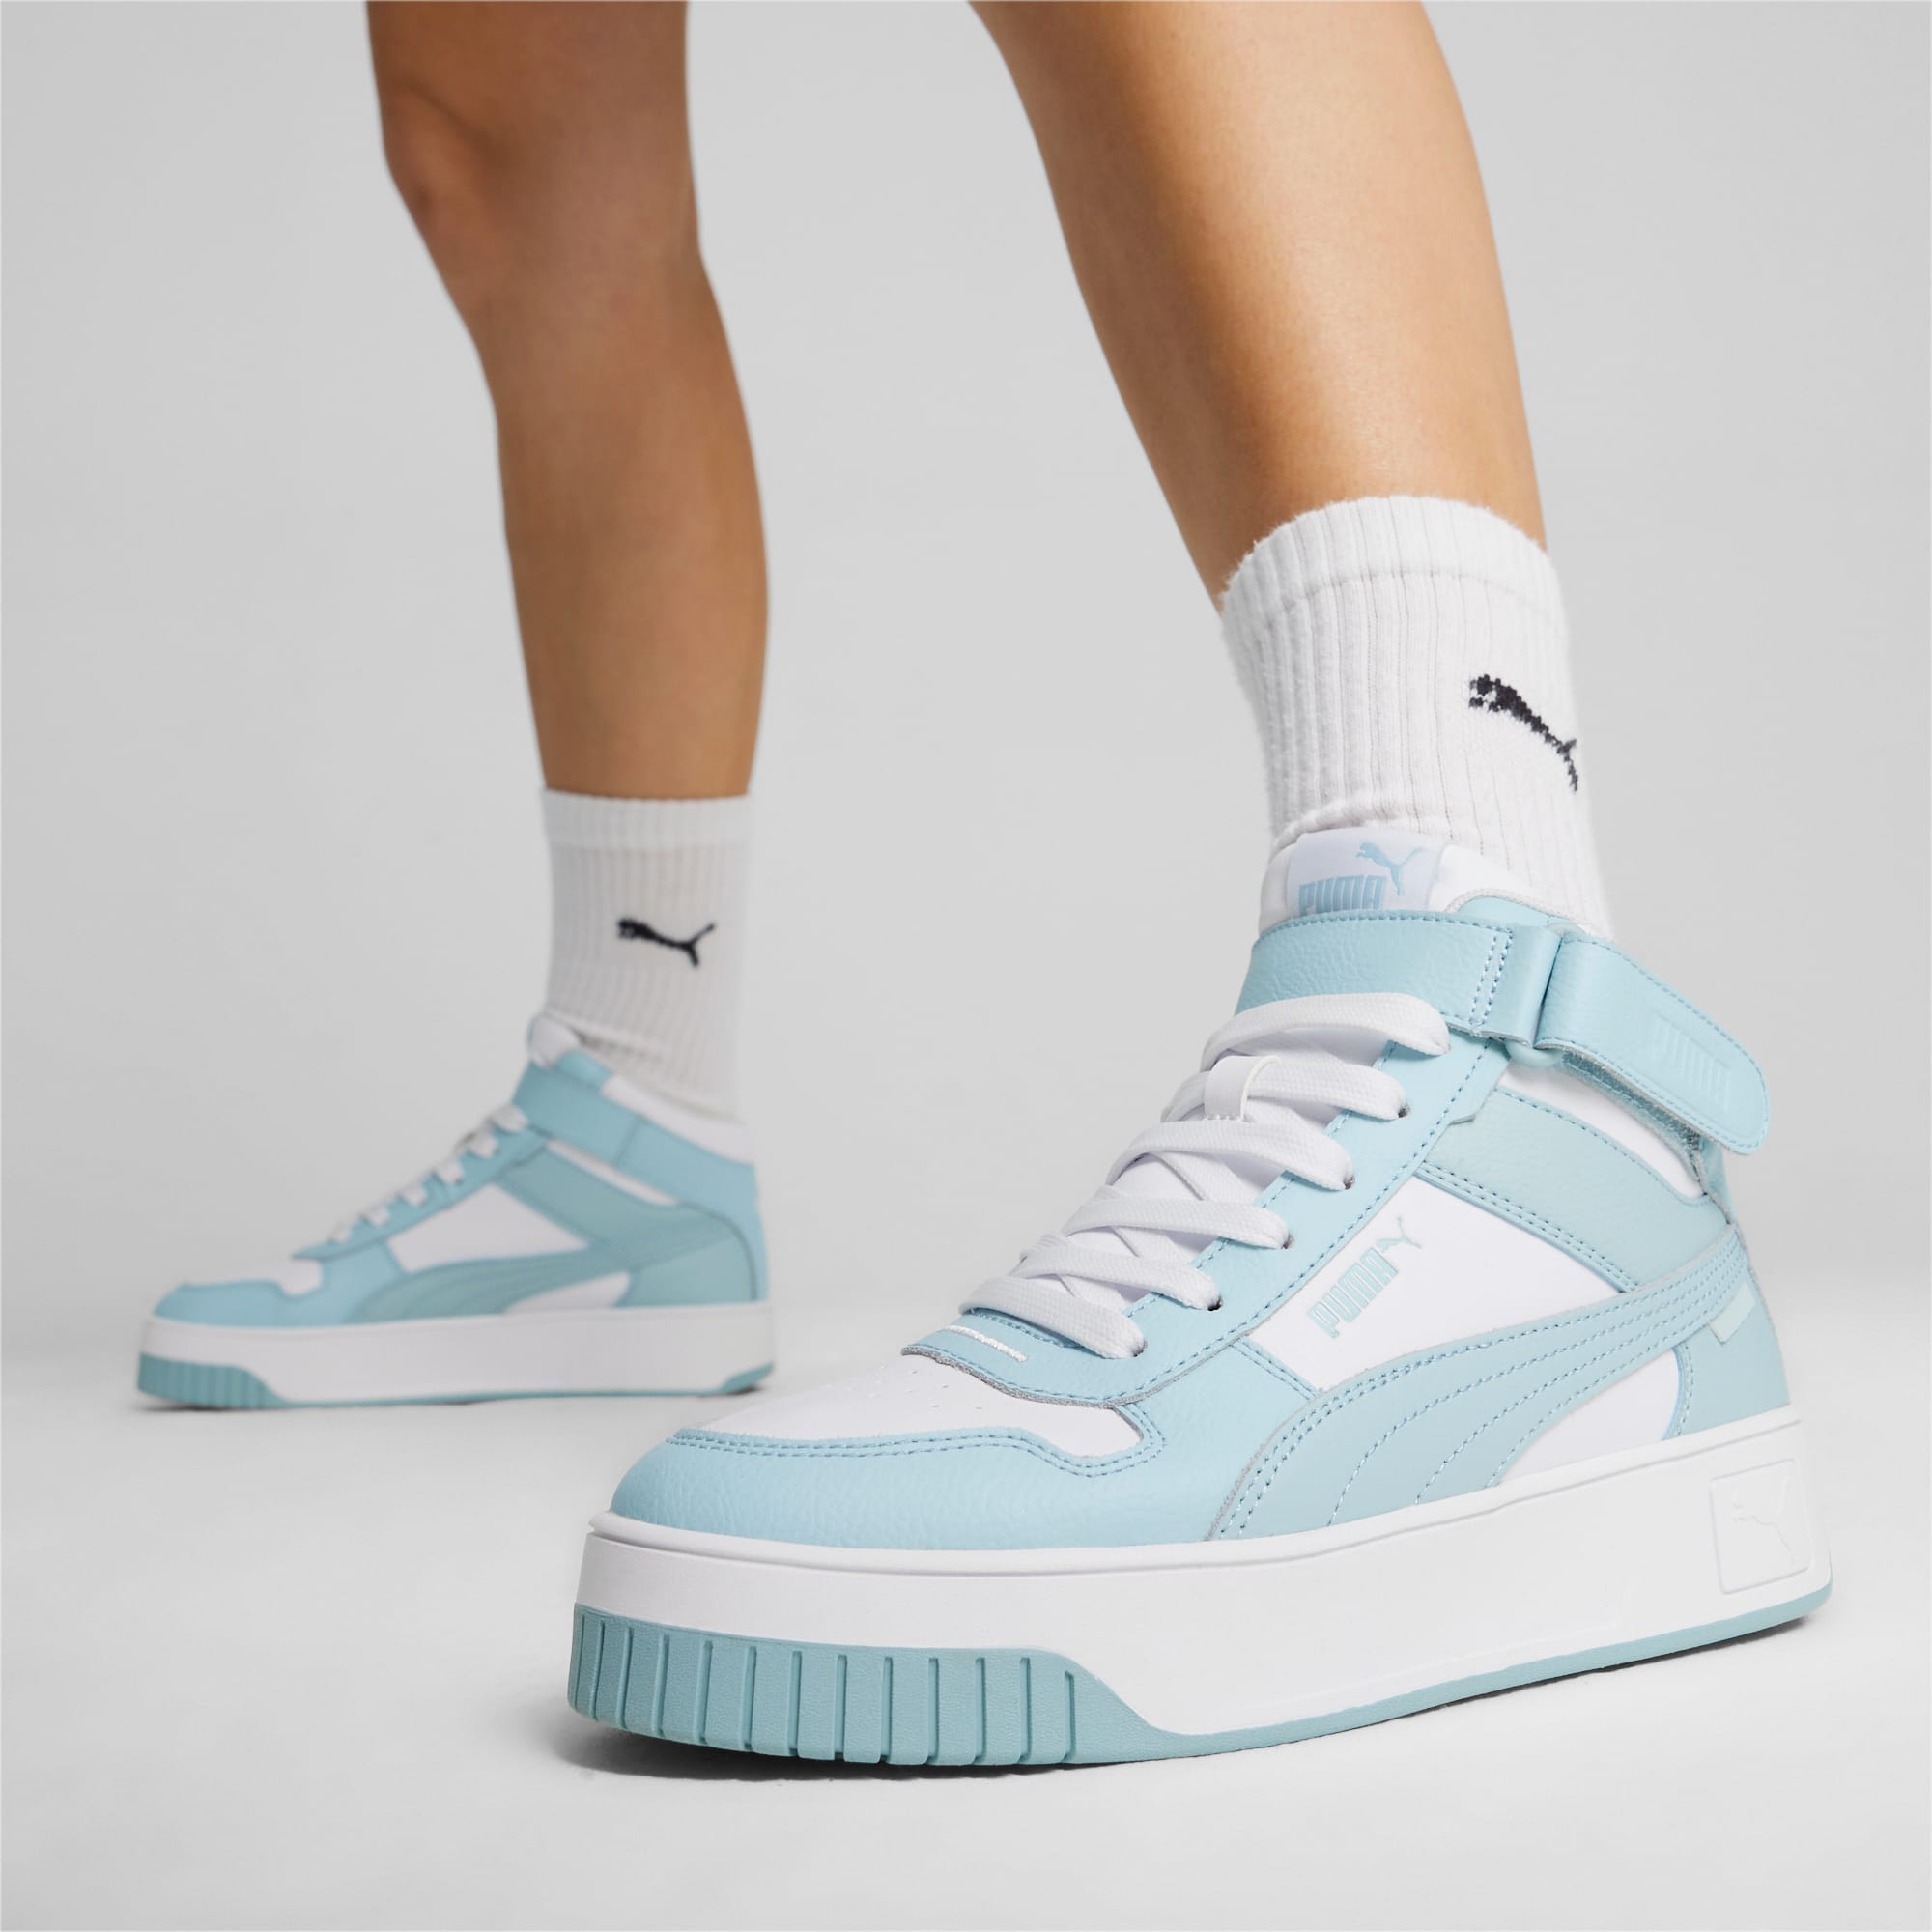 PUMA Carina Street Mid Women's Sneakers, White/Turquoise Surf, Size 37,5, Shoes